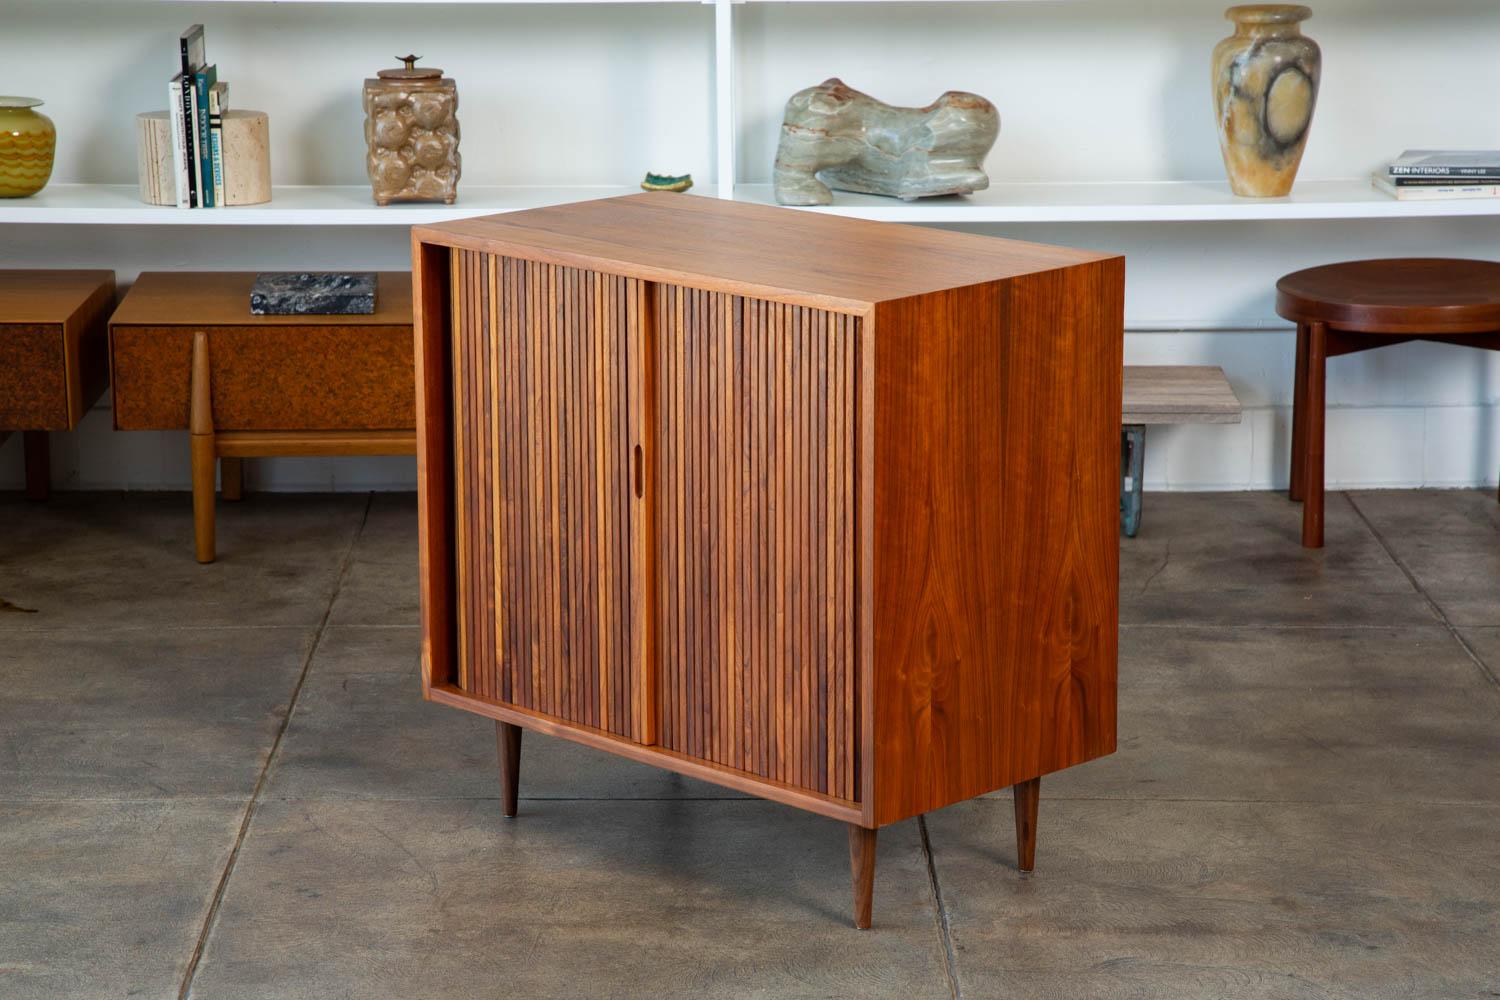 A Milo Baughman for Glenn of California tambour door cabinet. The cabinet features an oiled walnut frame and doors with a sliding walnut shelf atop three red painted drawers. We have two cabinets available and they are priced